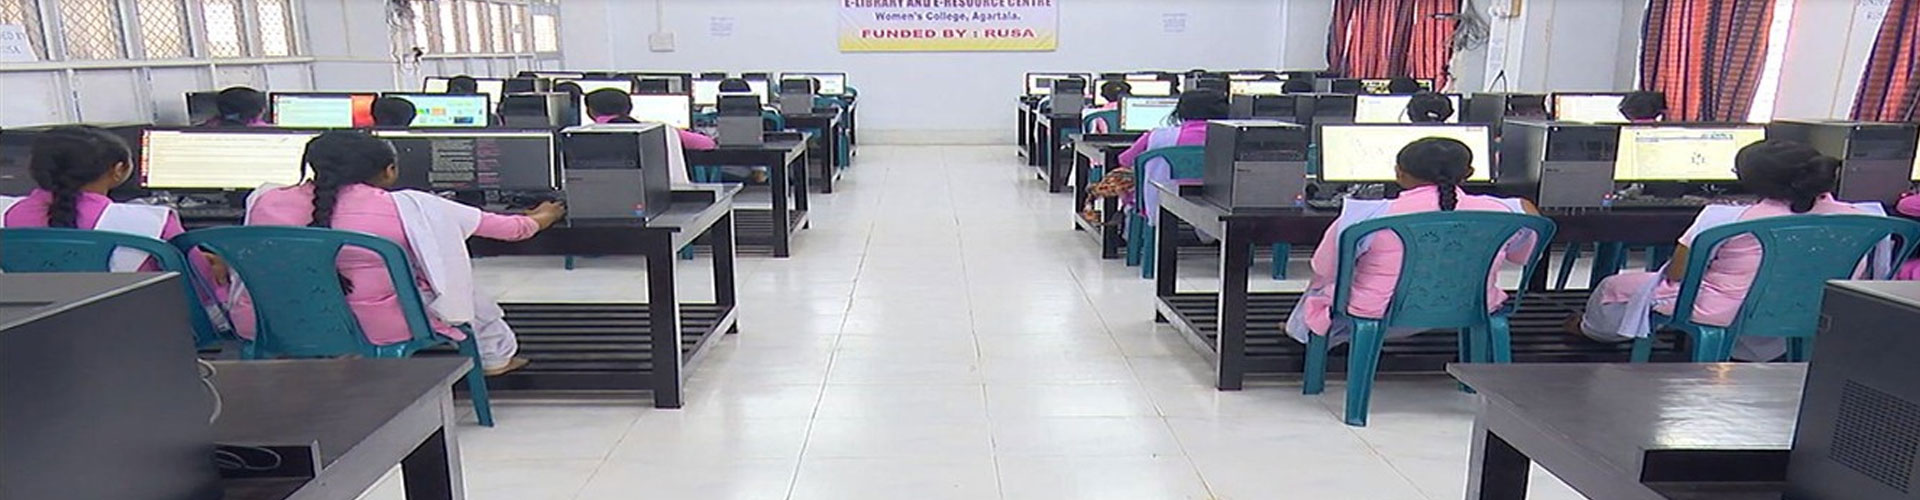 Image of Womens college library